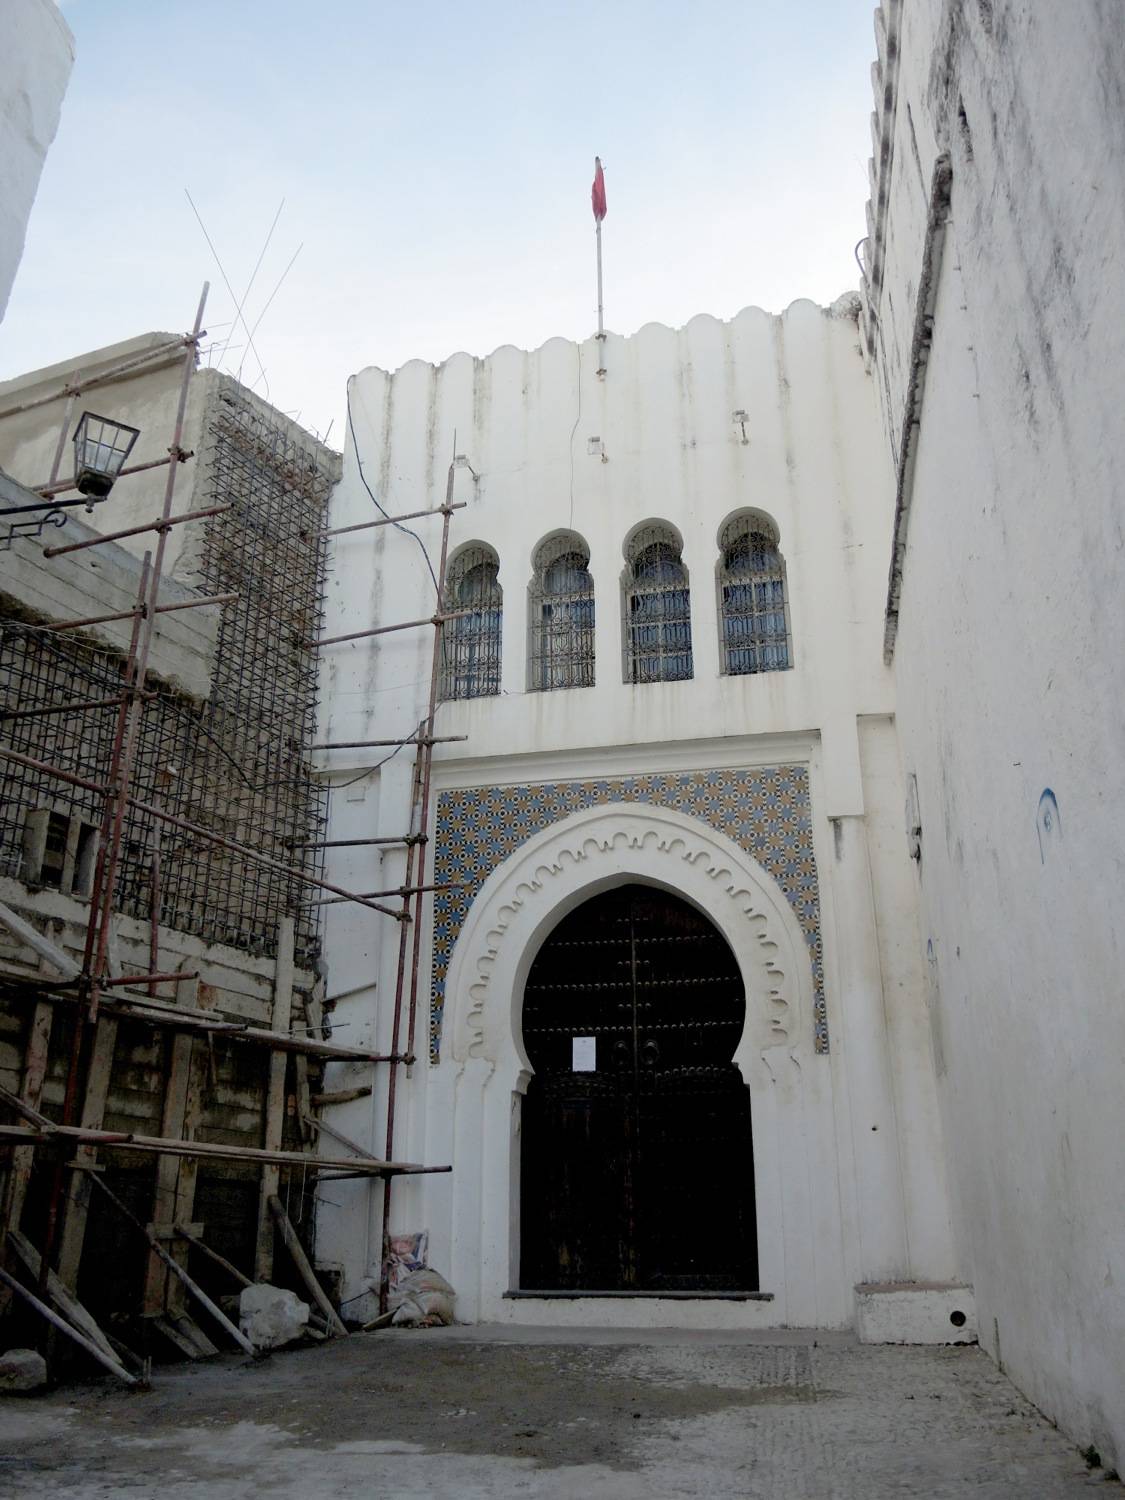 View of the entrance to Dar al-Makhzen and restoration work on the facade of Jami' al-Qsaba to the left